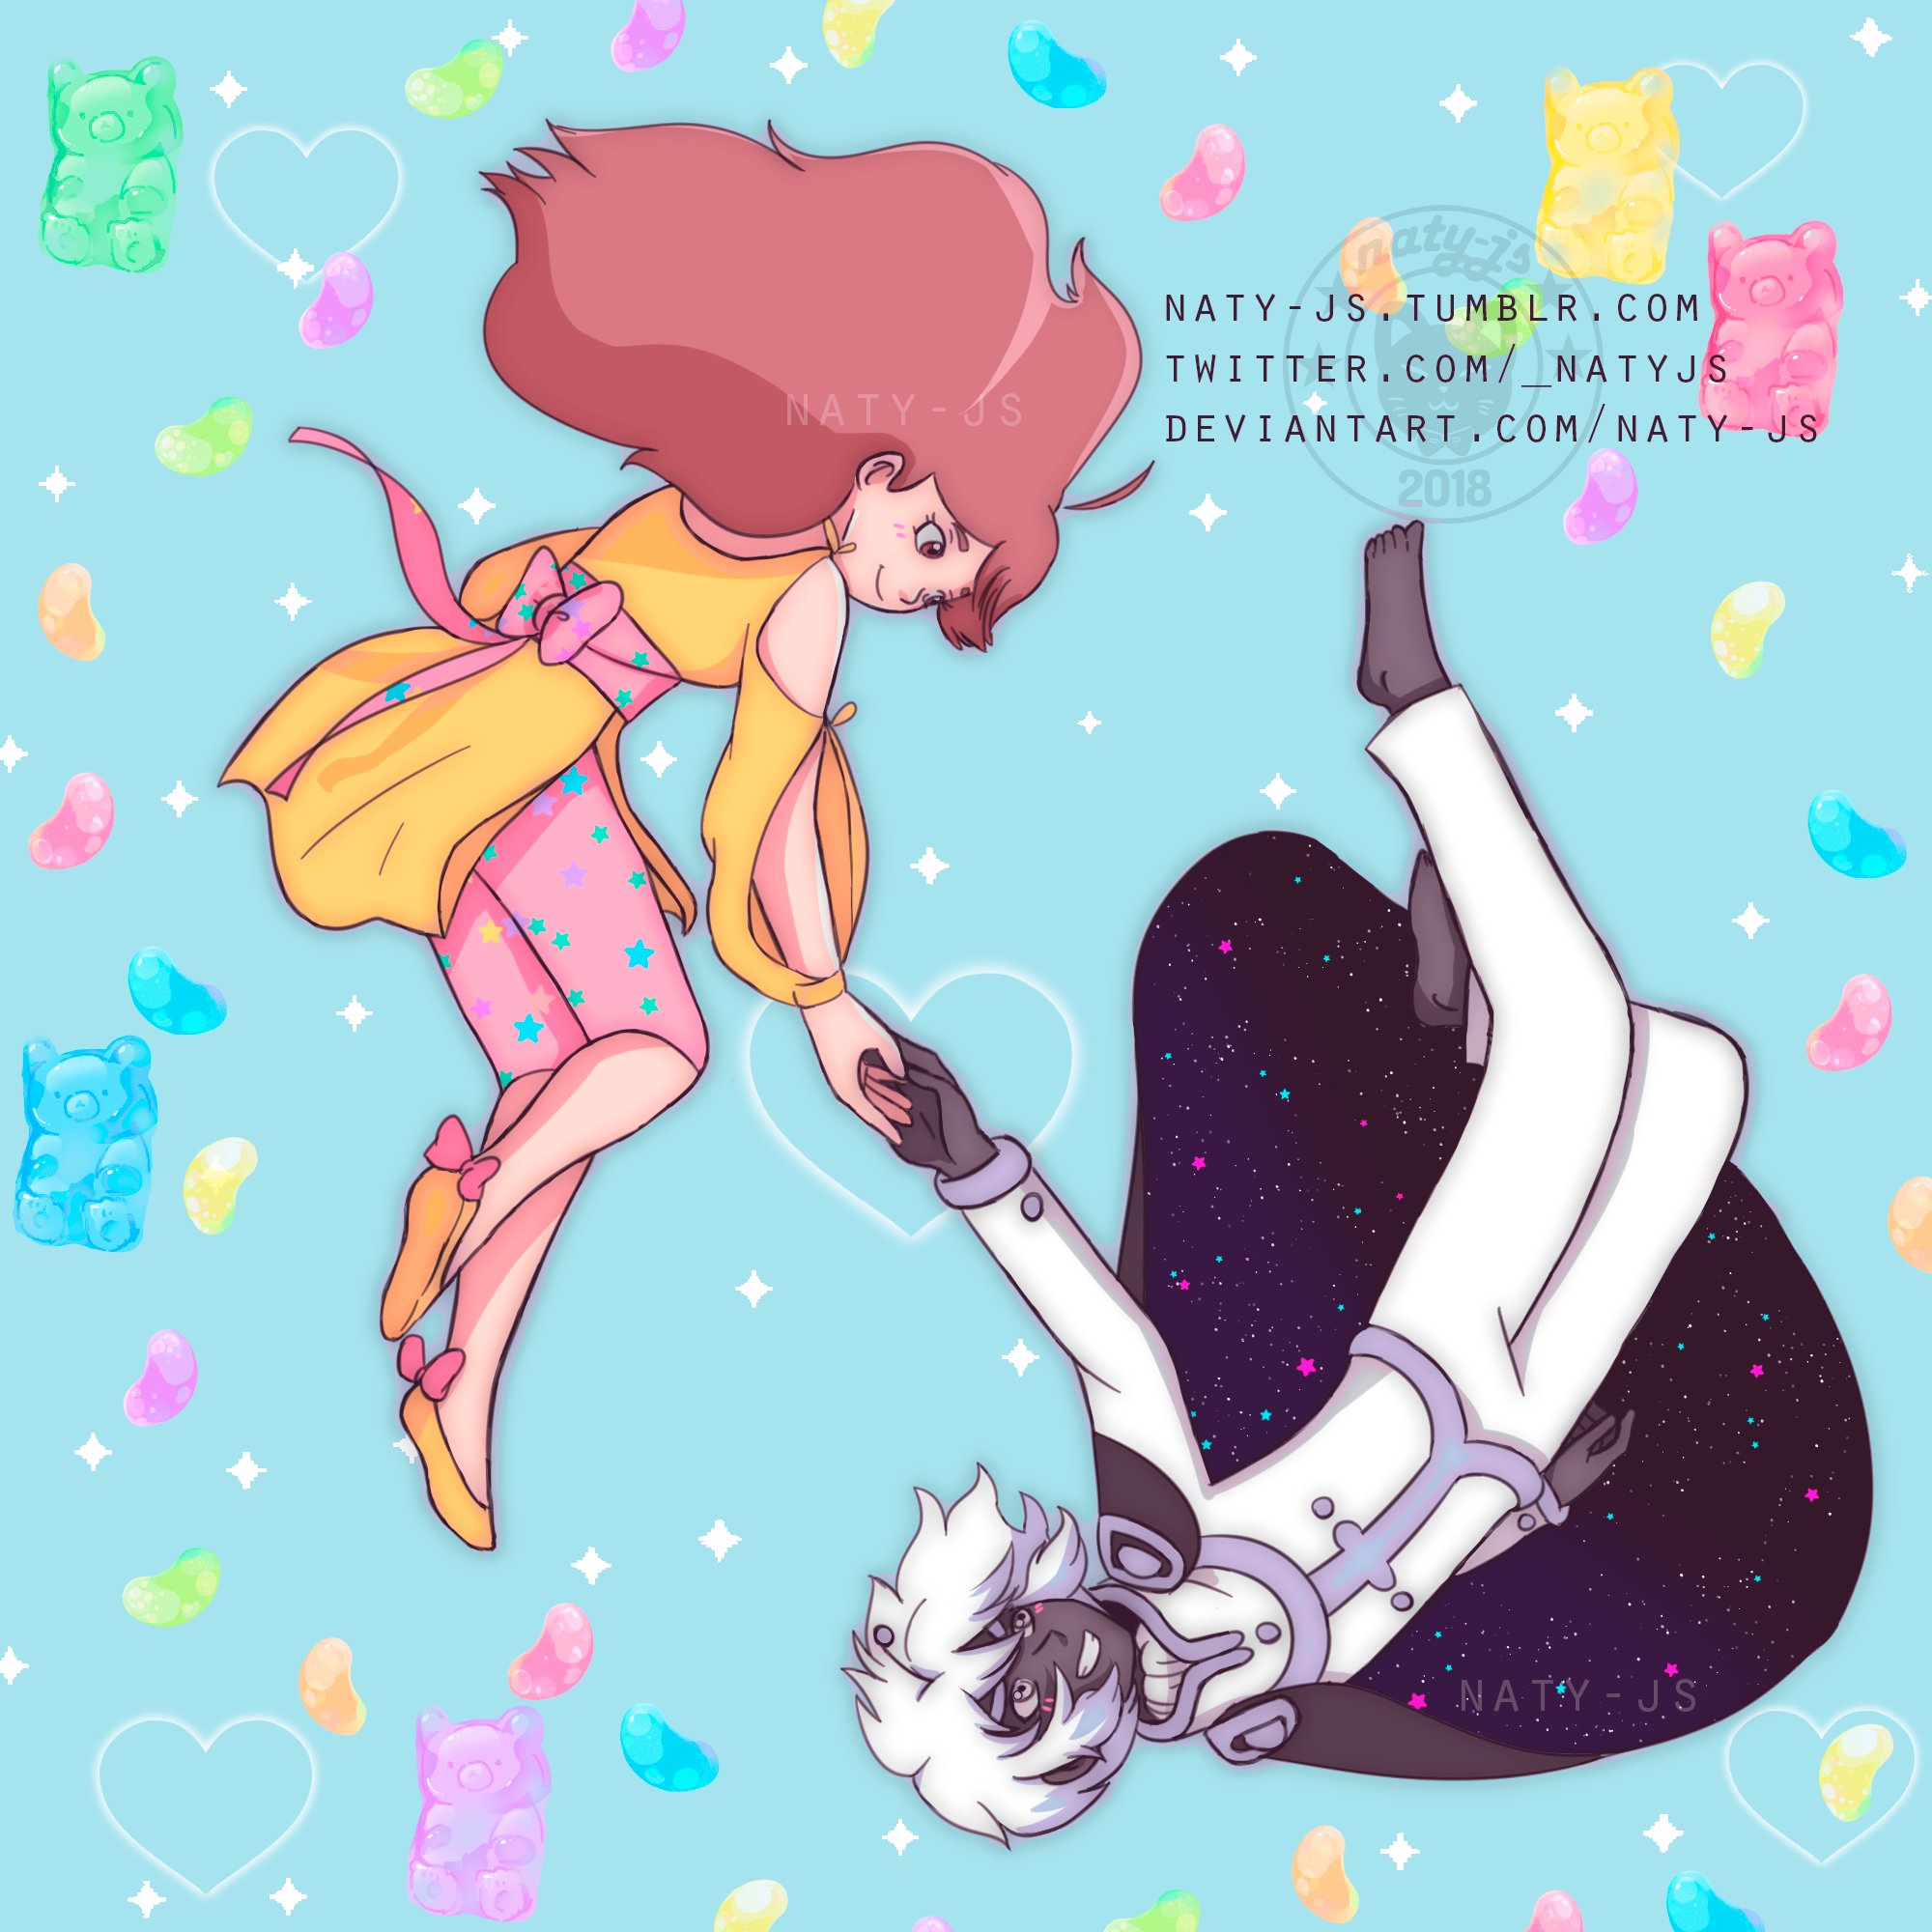 Naty-js 🍓 on Twitter: "Bee x Puppycat ( Space Outlaw Form.